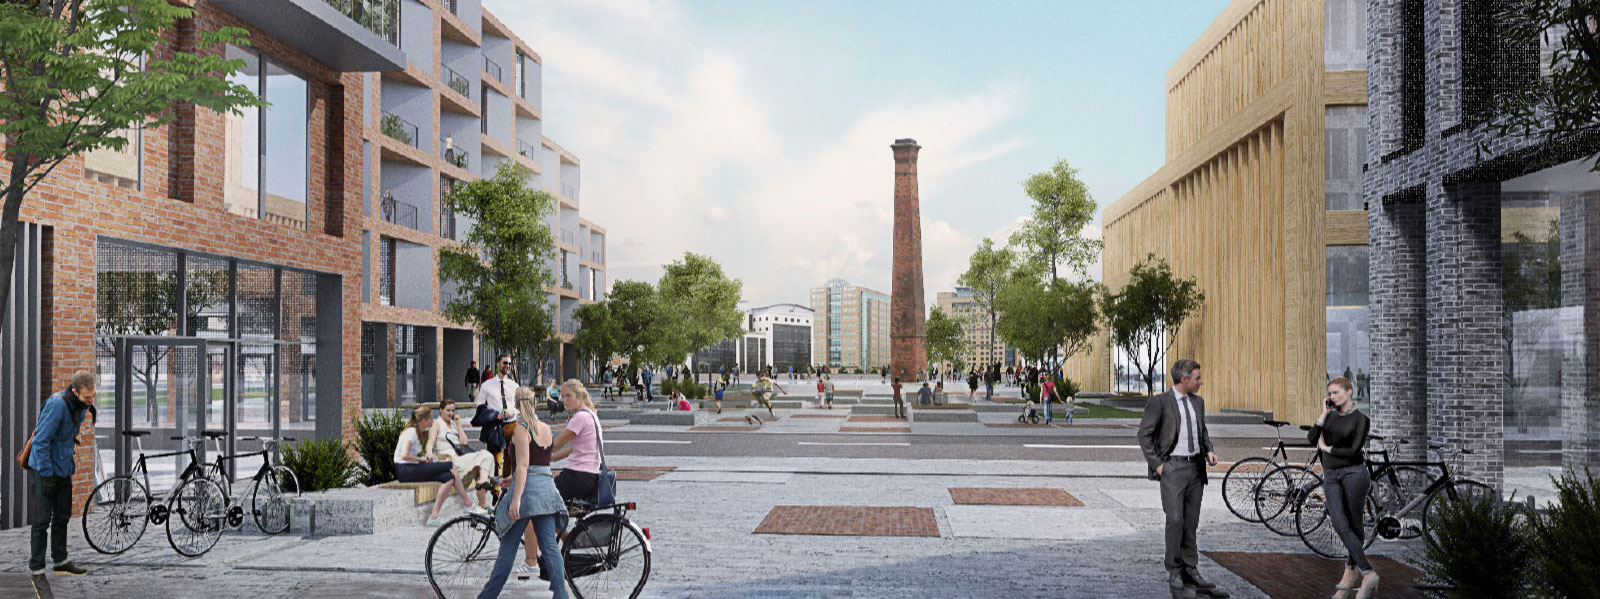 Osborne+Co teams up with McAleer & Rushe for major waterfront development in Glasgow